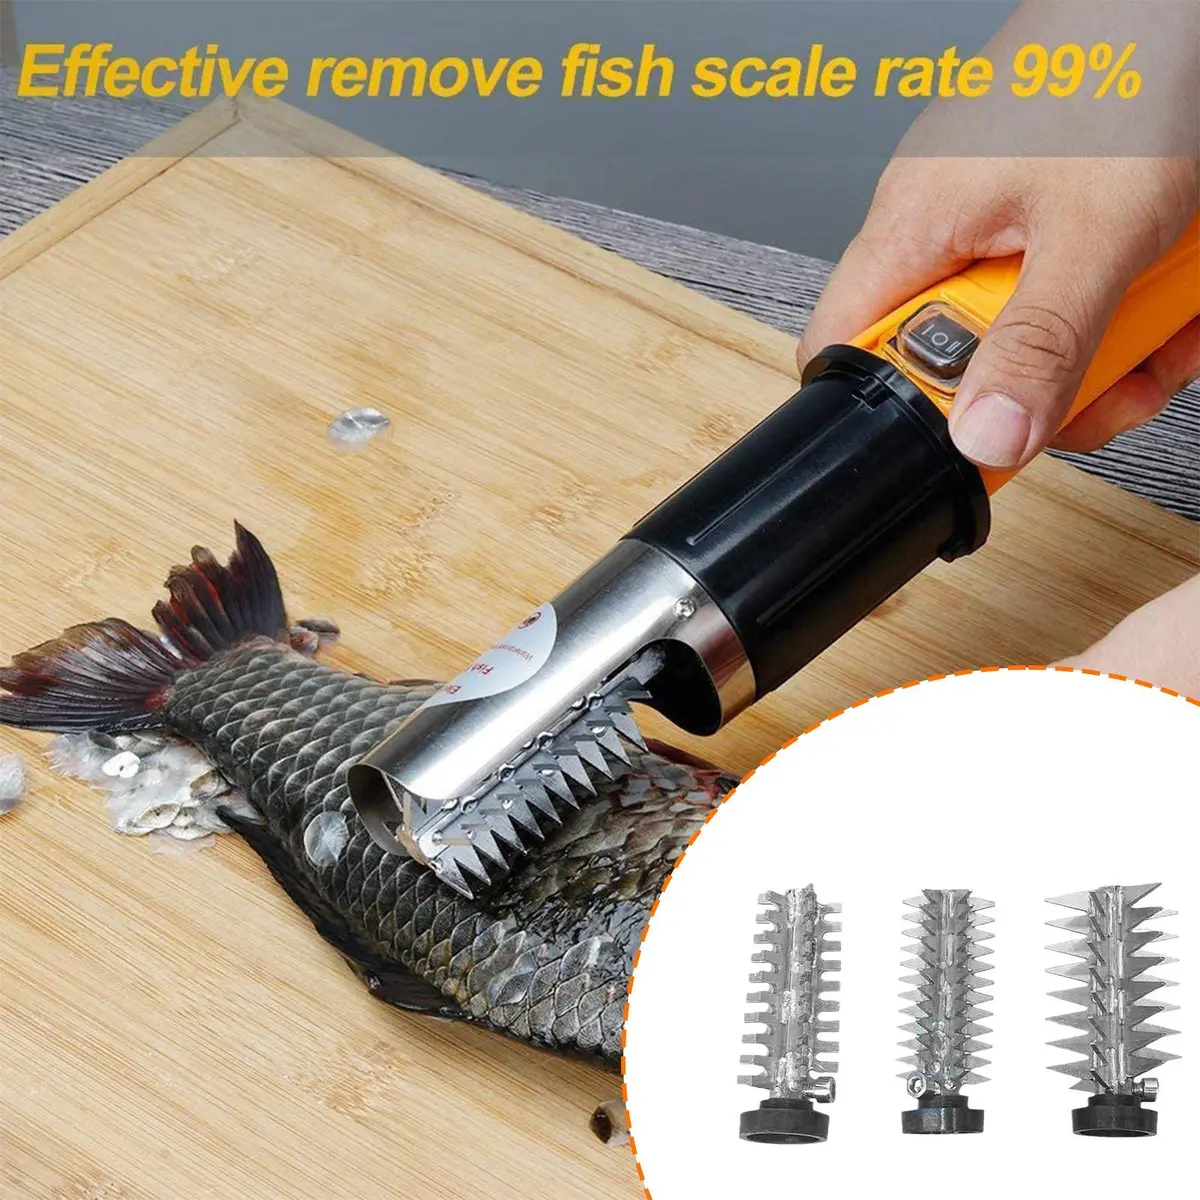 Fish Scale Remover Accessories Electric Scaler Remove Cutter Too